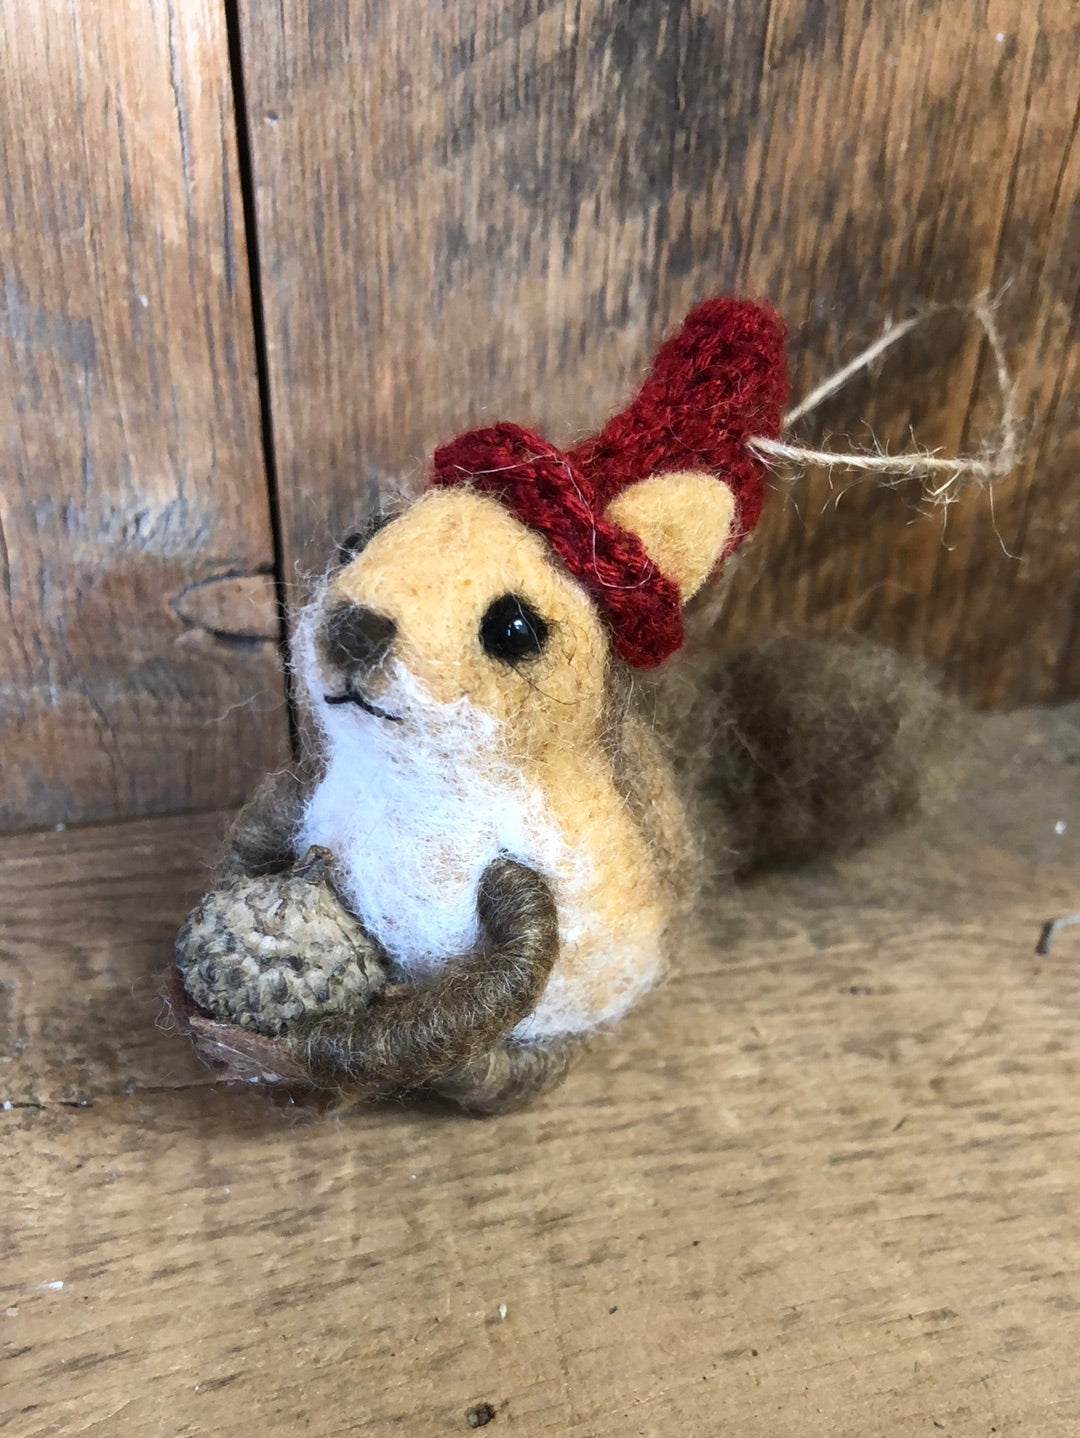 Wool Felt Holiday Squirrel in Knitted Red Hat with Acorn